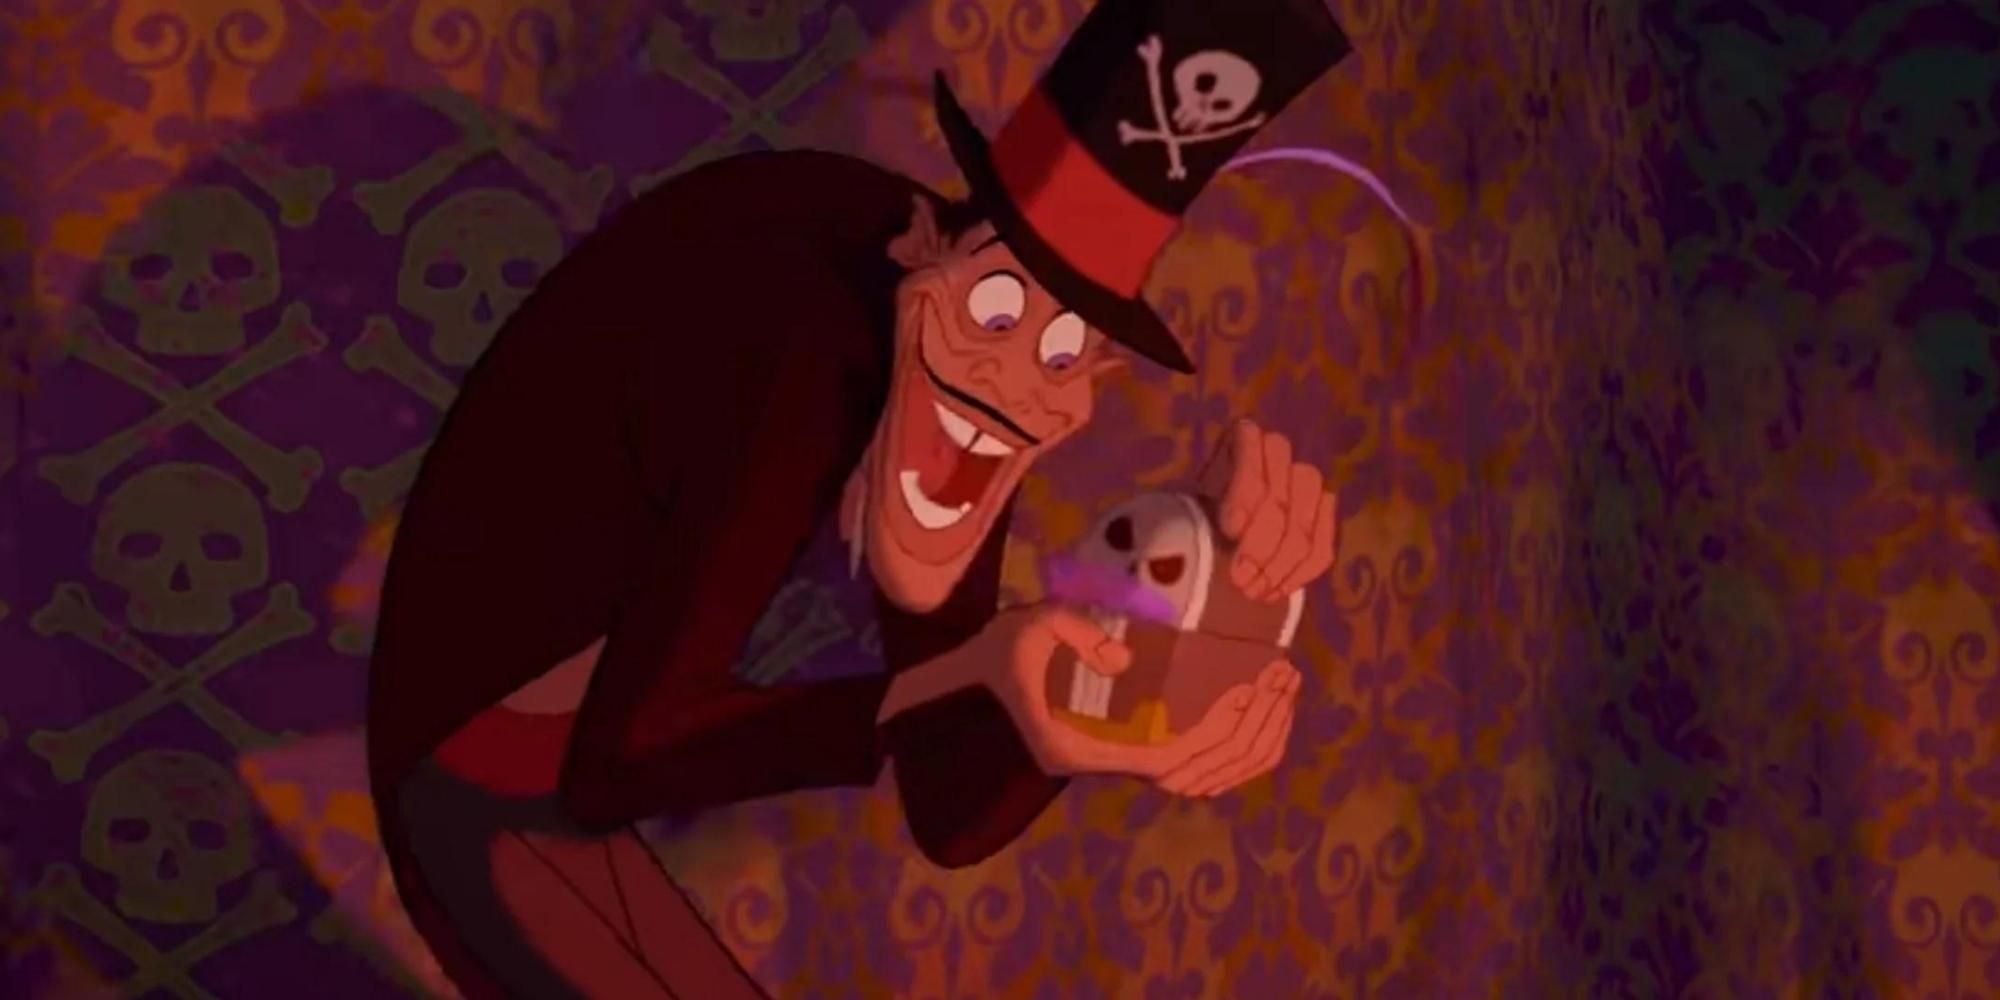 Dr. Facilier in The Princess and the Frog